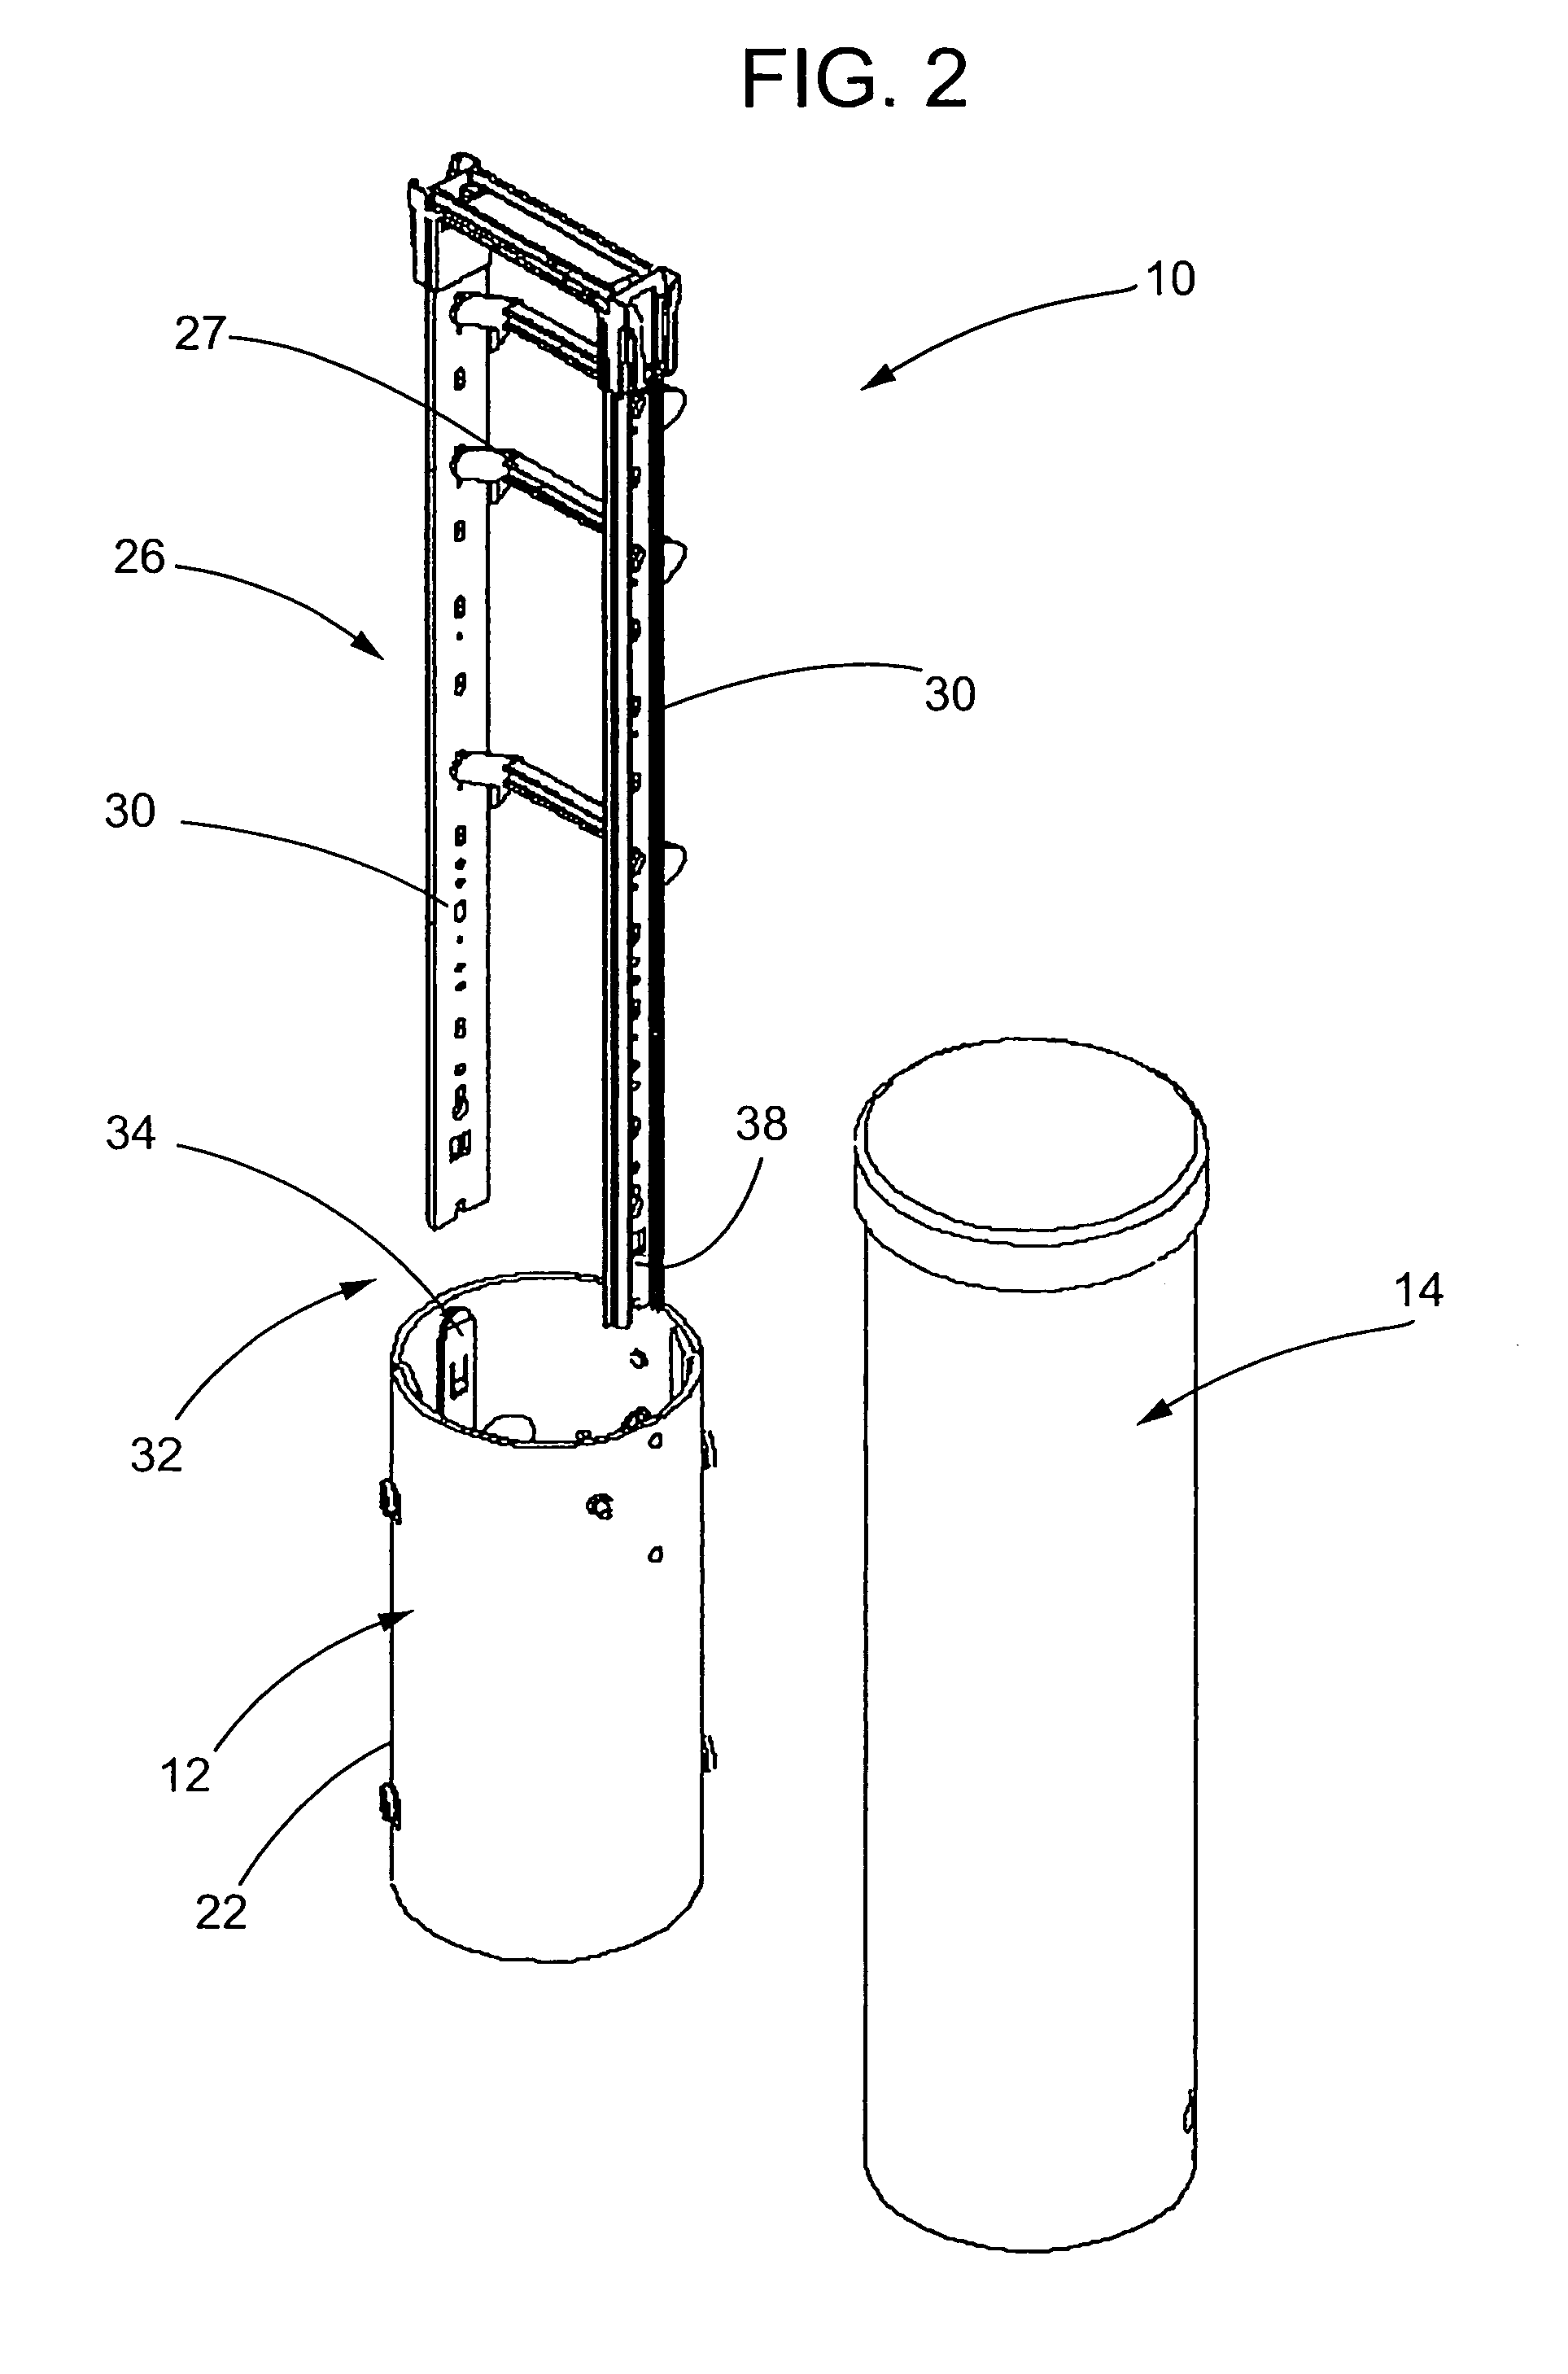 Universal mounting arrangement for components of an electronic enclosure